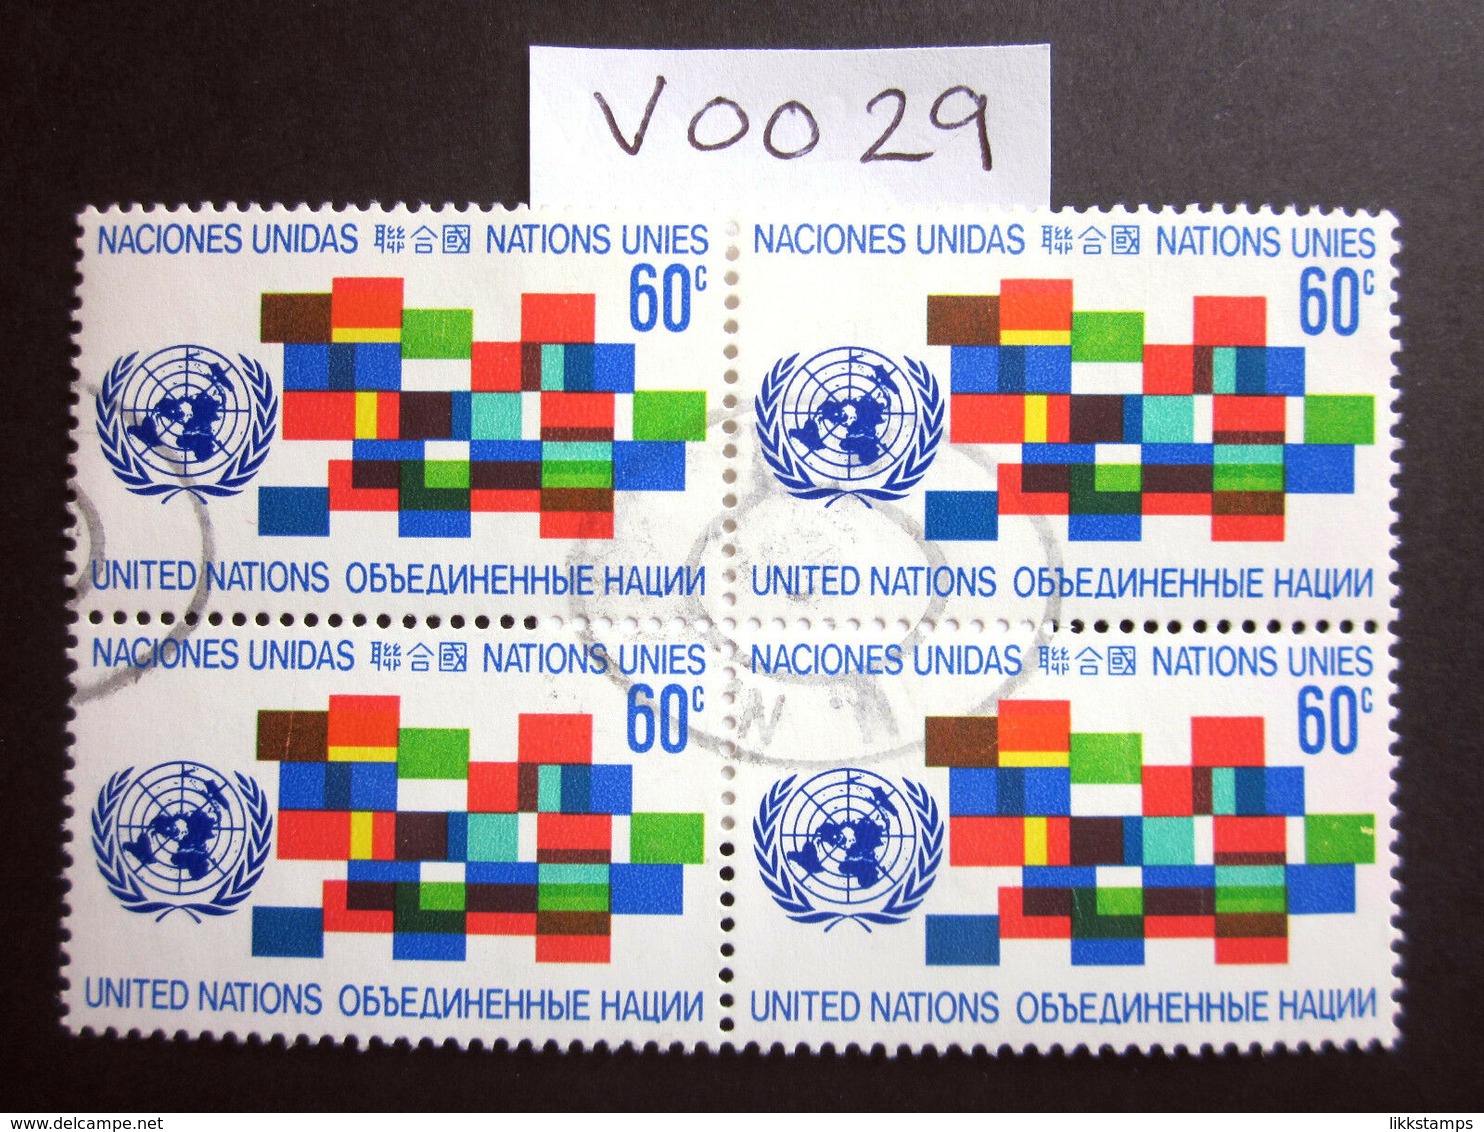 1971 A FINE USED BLOCK OF 4 "SG 223" PICTORIAL UNITED NATIONS USED STAMPS ( V0029 ) #00357 - Collections, Lots & Series